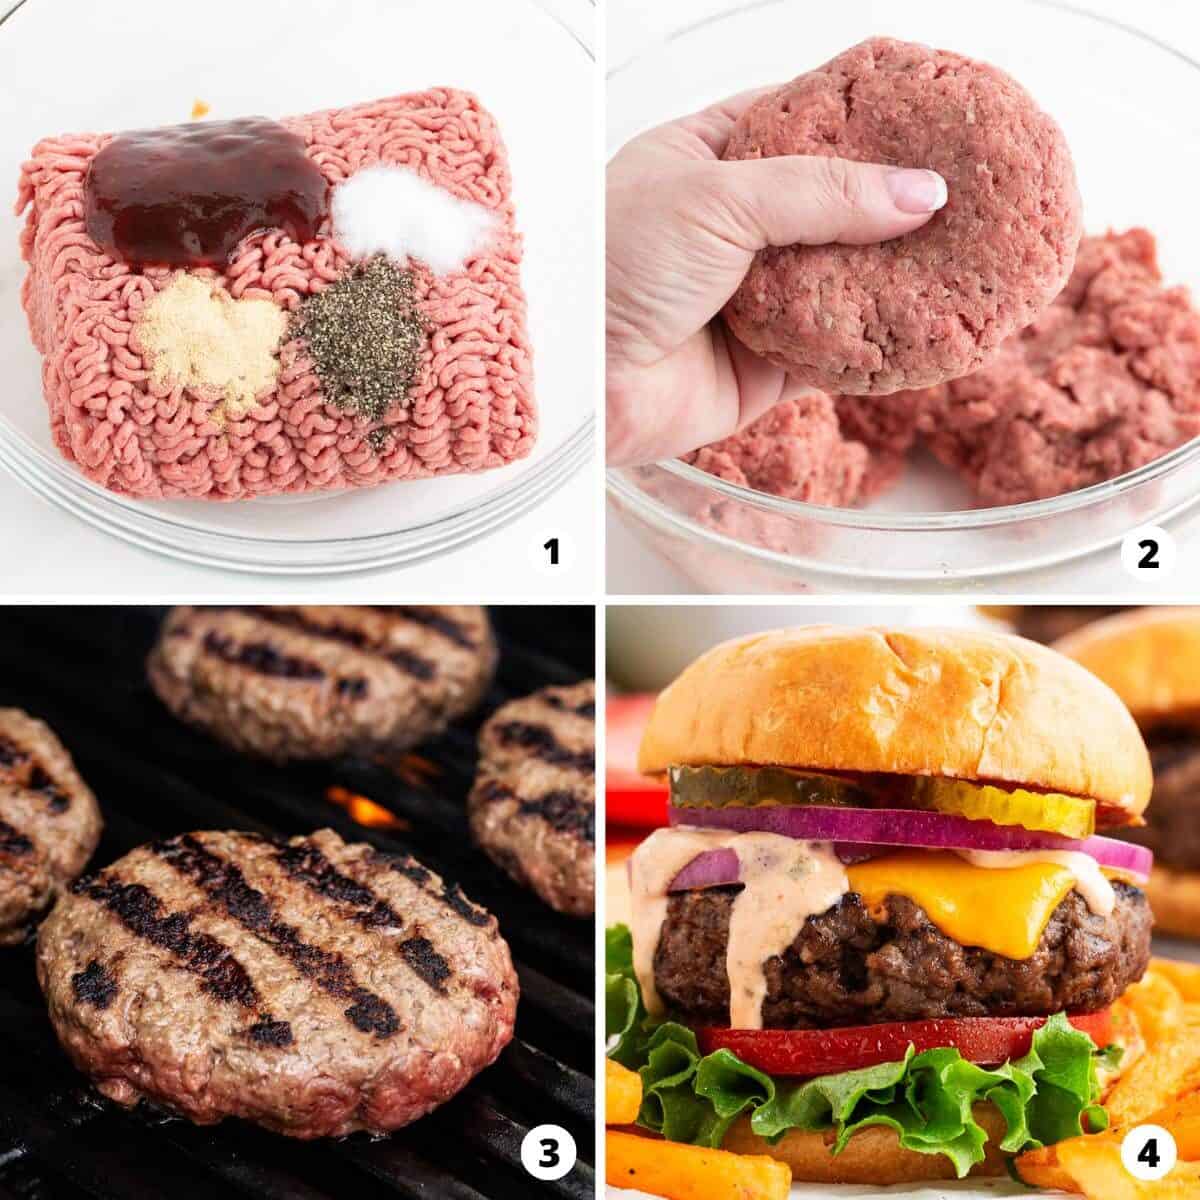 Showing how to make cheeseburgers in a 4 step collage.